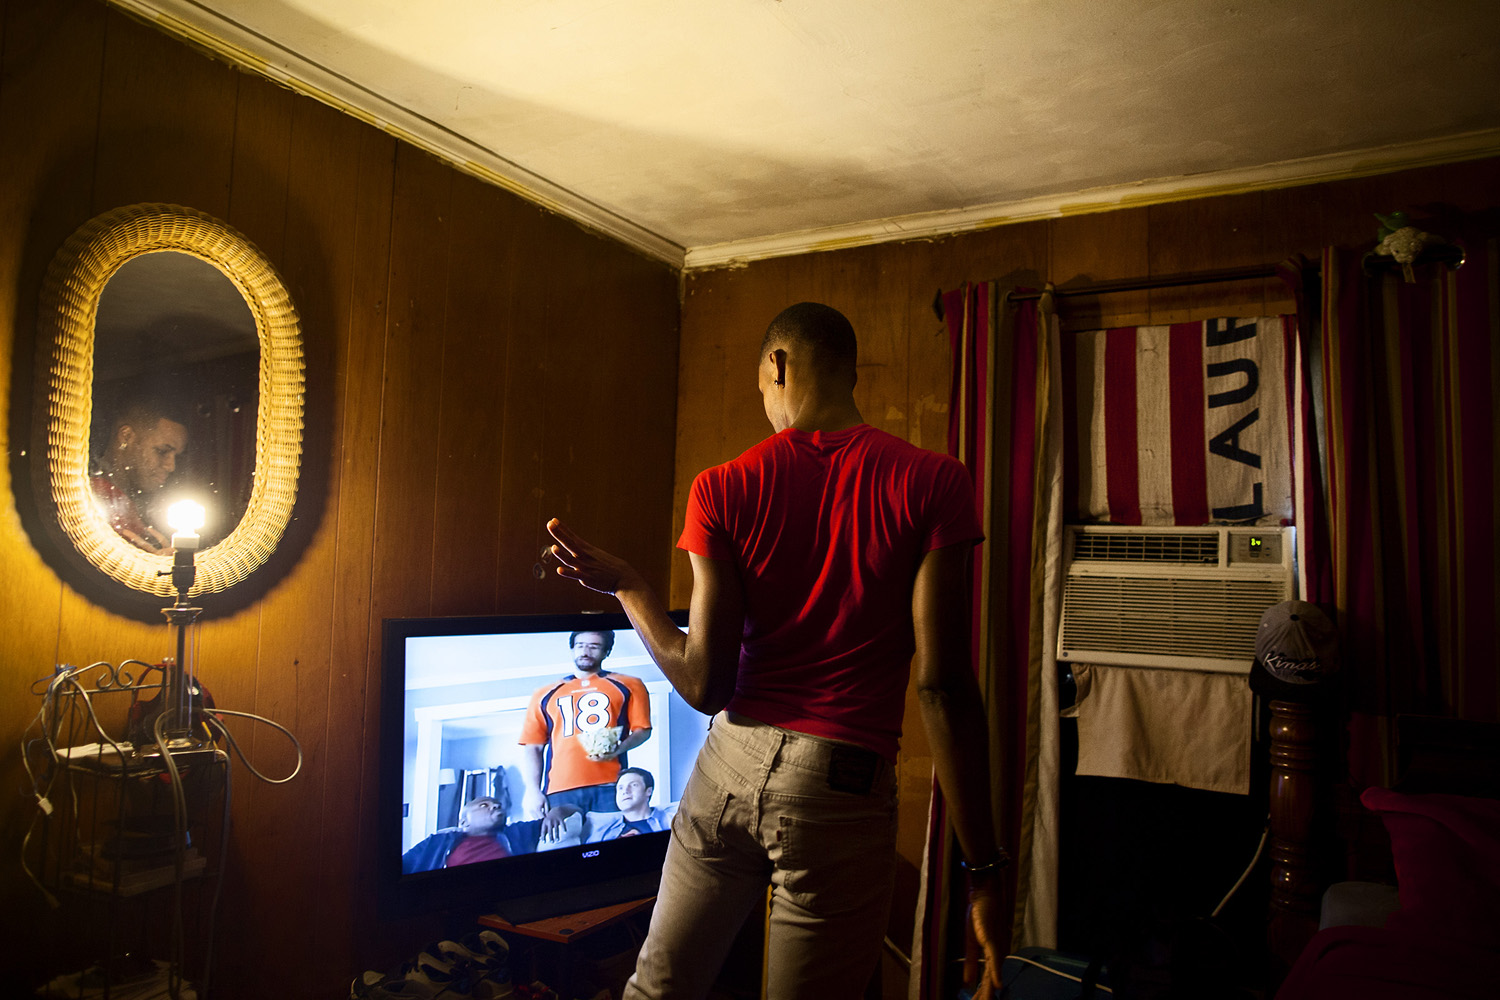 Adrian watches a TV commercial in his bedroom in his mother's house. Several of the members of the line live at home with relatives. Among their ranks, a number have faced considerable difficulty when dealing with family members' reactions to their orientation. The Prancing Elites are a group of young, gay, black men who practice J-Sette, a form of dance birthed at Historically Black Colleges that is characterized by sharp, cheerleading-style movements and hip-hop performed to an eight-count beat. Traditionally, men cannot join college dance teams, so young gay black men have been forming their own J-Sette "lines," organizing competitions, and creating their own outlets to practice this type of dance.